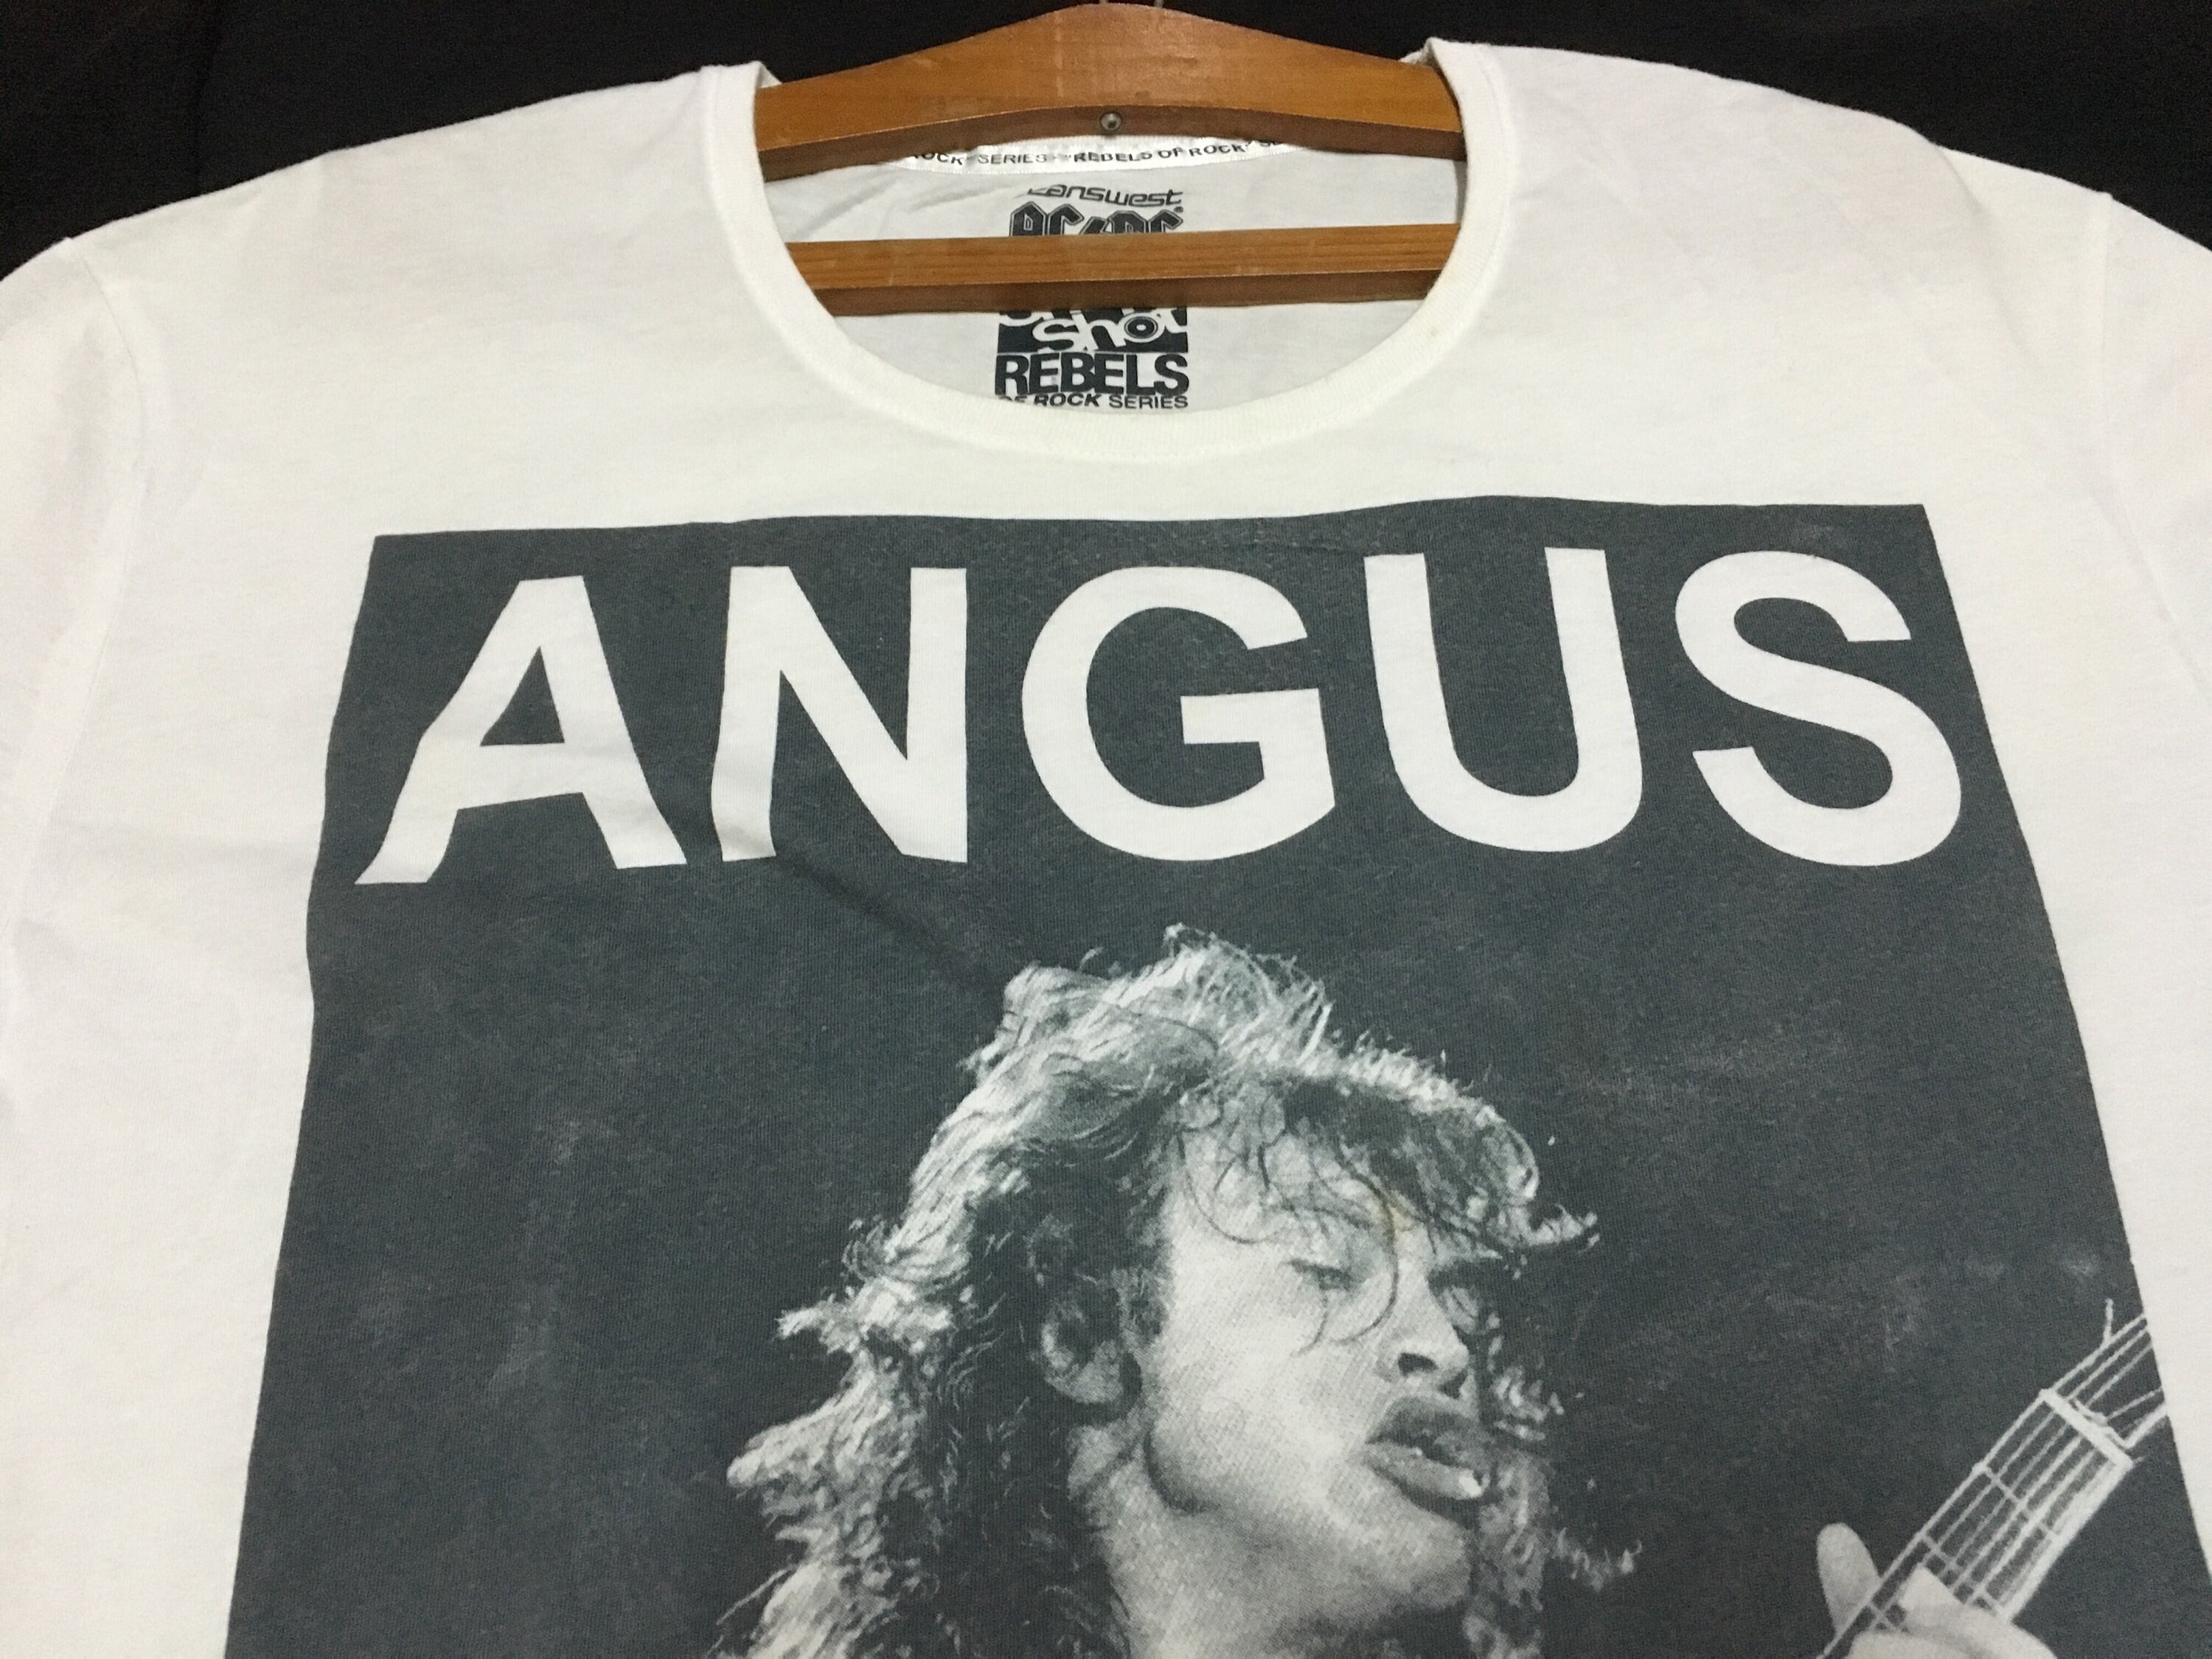 ACDC / Rare Roll X Rock Etsy Tees Rock N Large - Angus T Size Young Band Tees Vintage Shirt Band